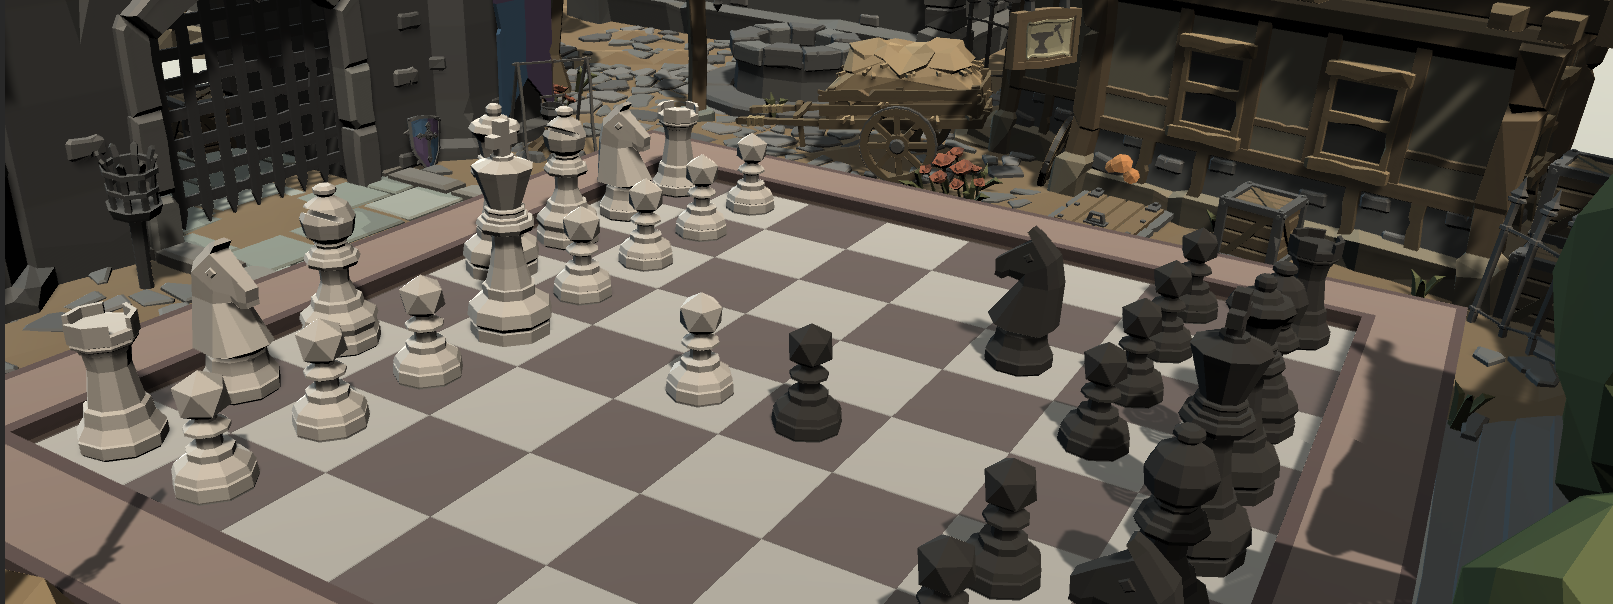 LowPoly Chess 3D